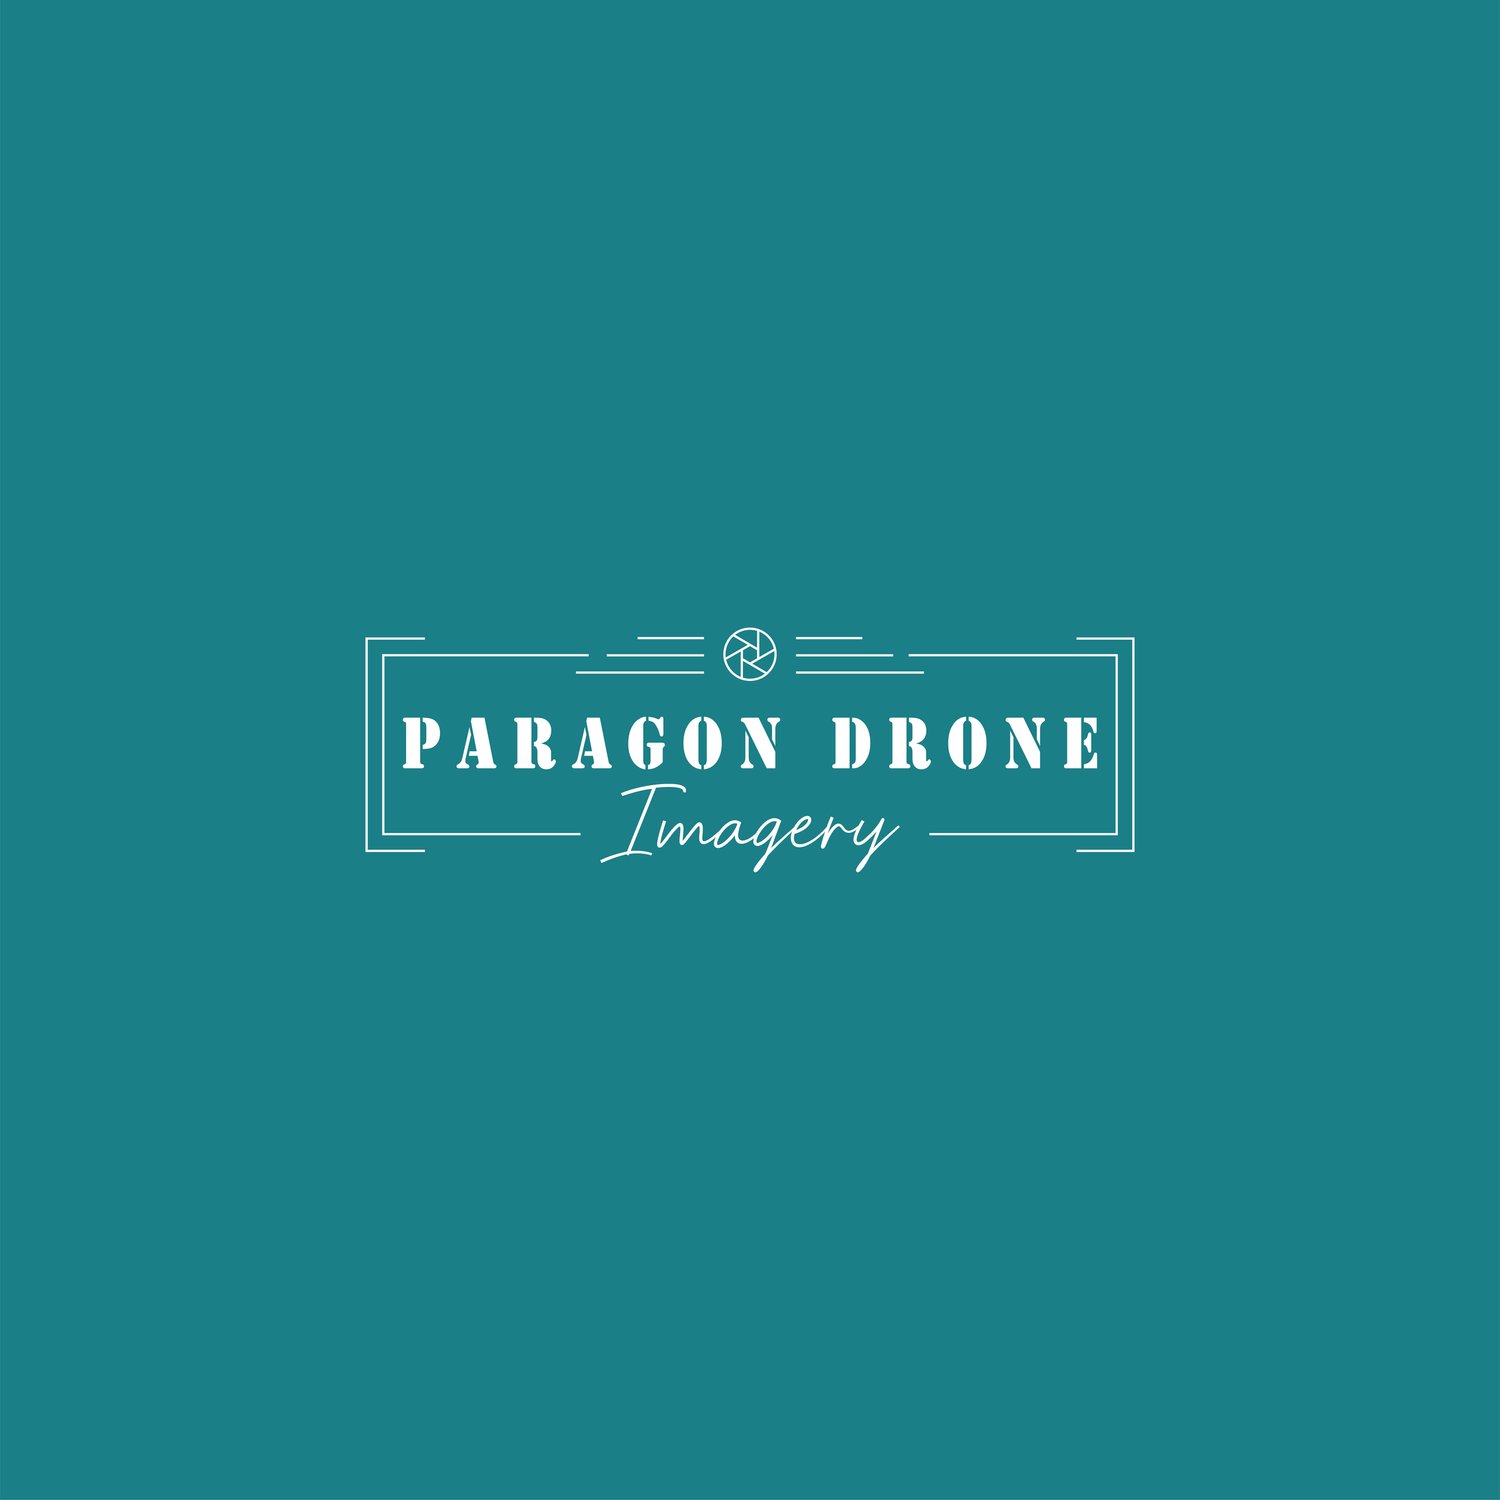 Paragon Drone Imagery